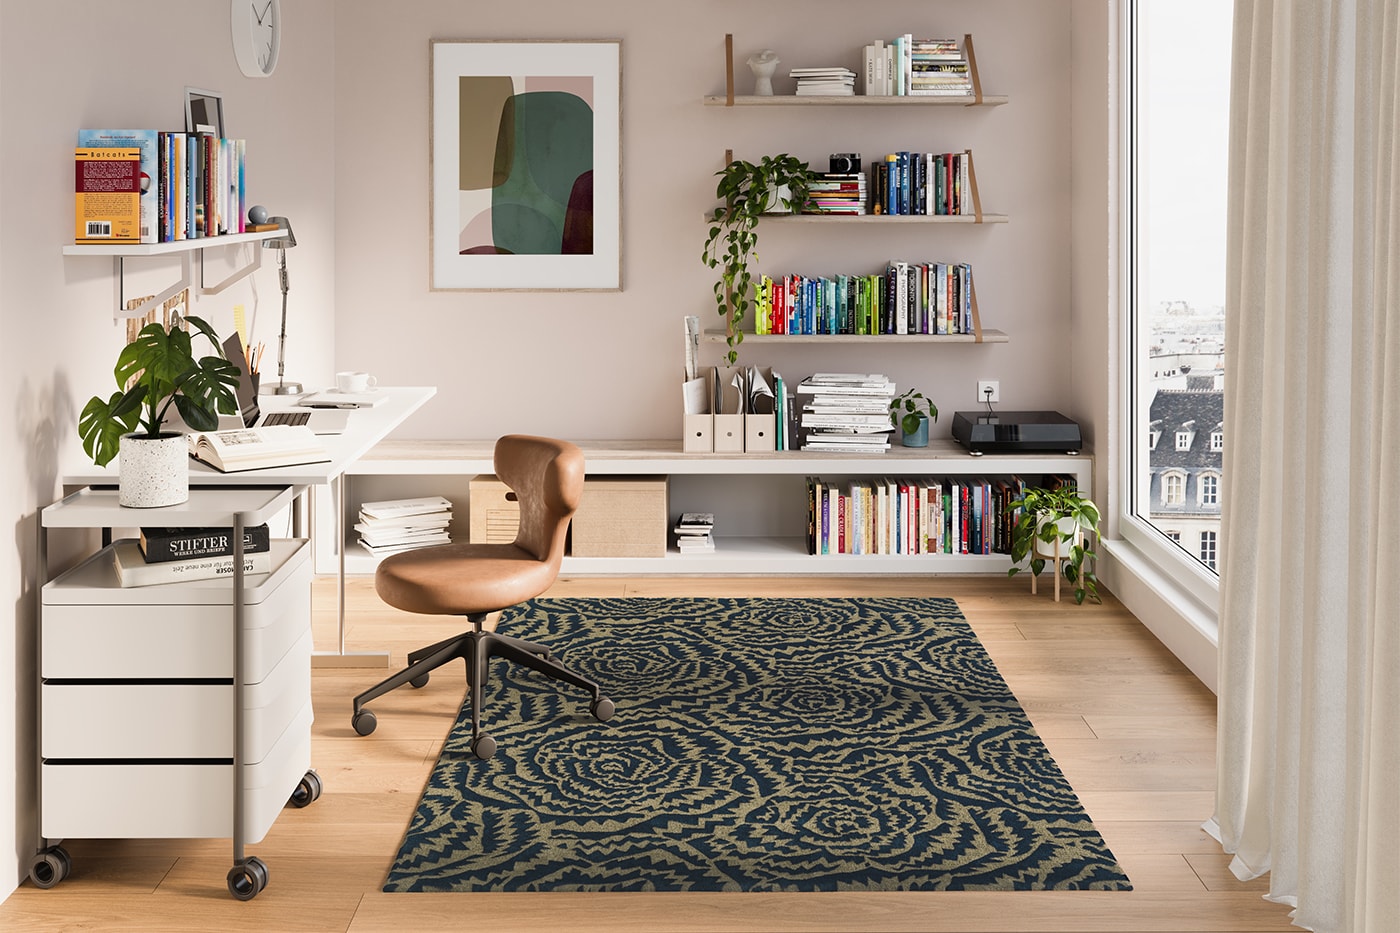 Eley Kishimoto Teams up with Floor Story for New Rug Collection